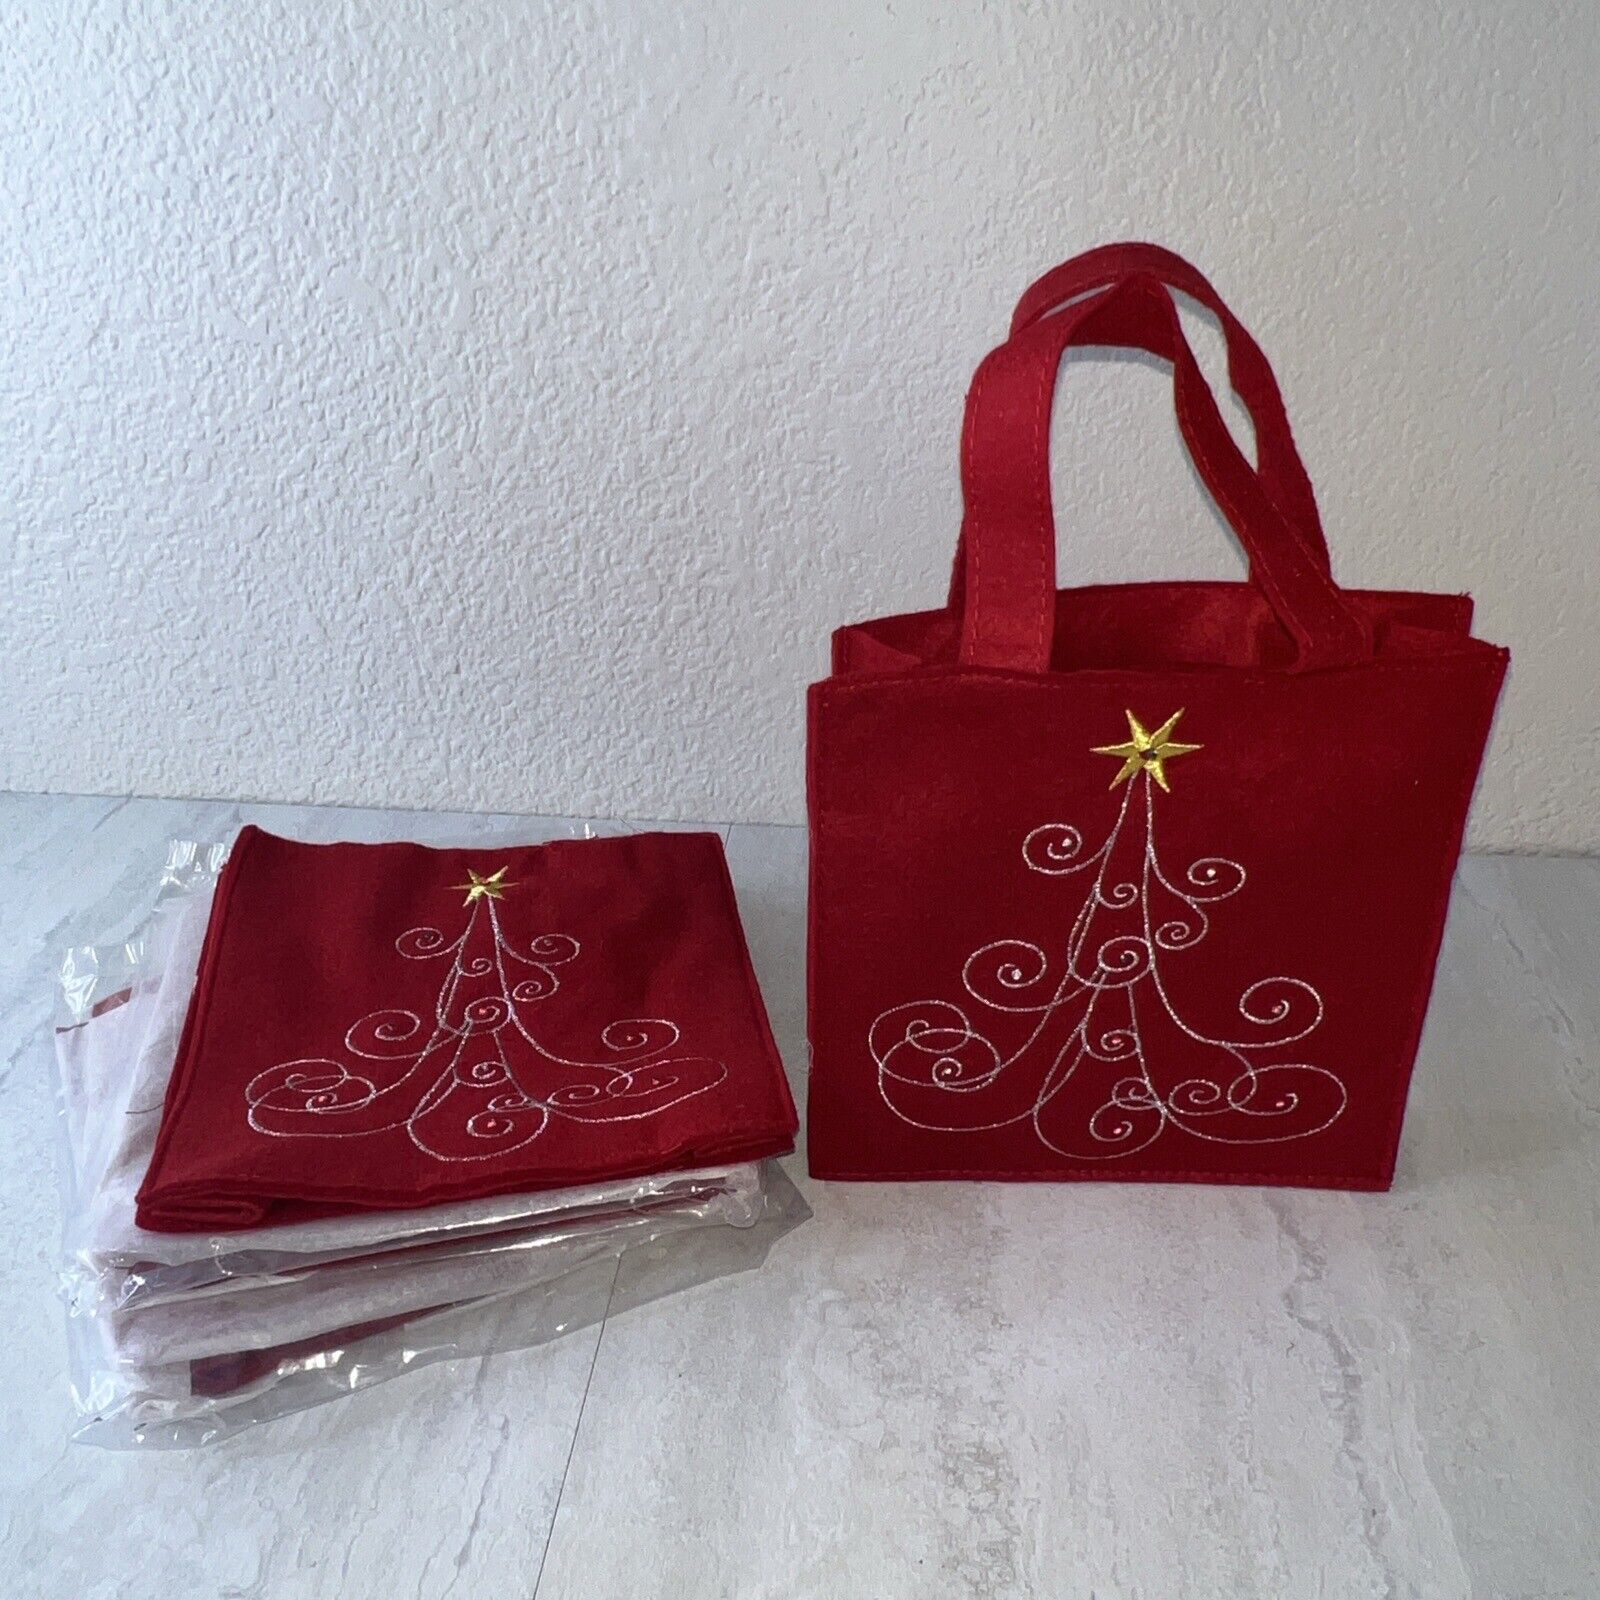 Avon Holiday Bag ~ Christmas Tree  Lot Of 4 Bags (read) 2 Bags In Sealed Pack